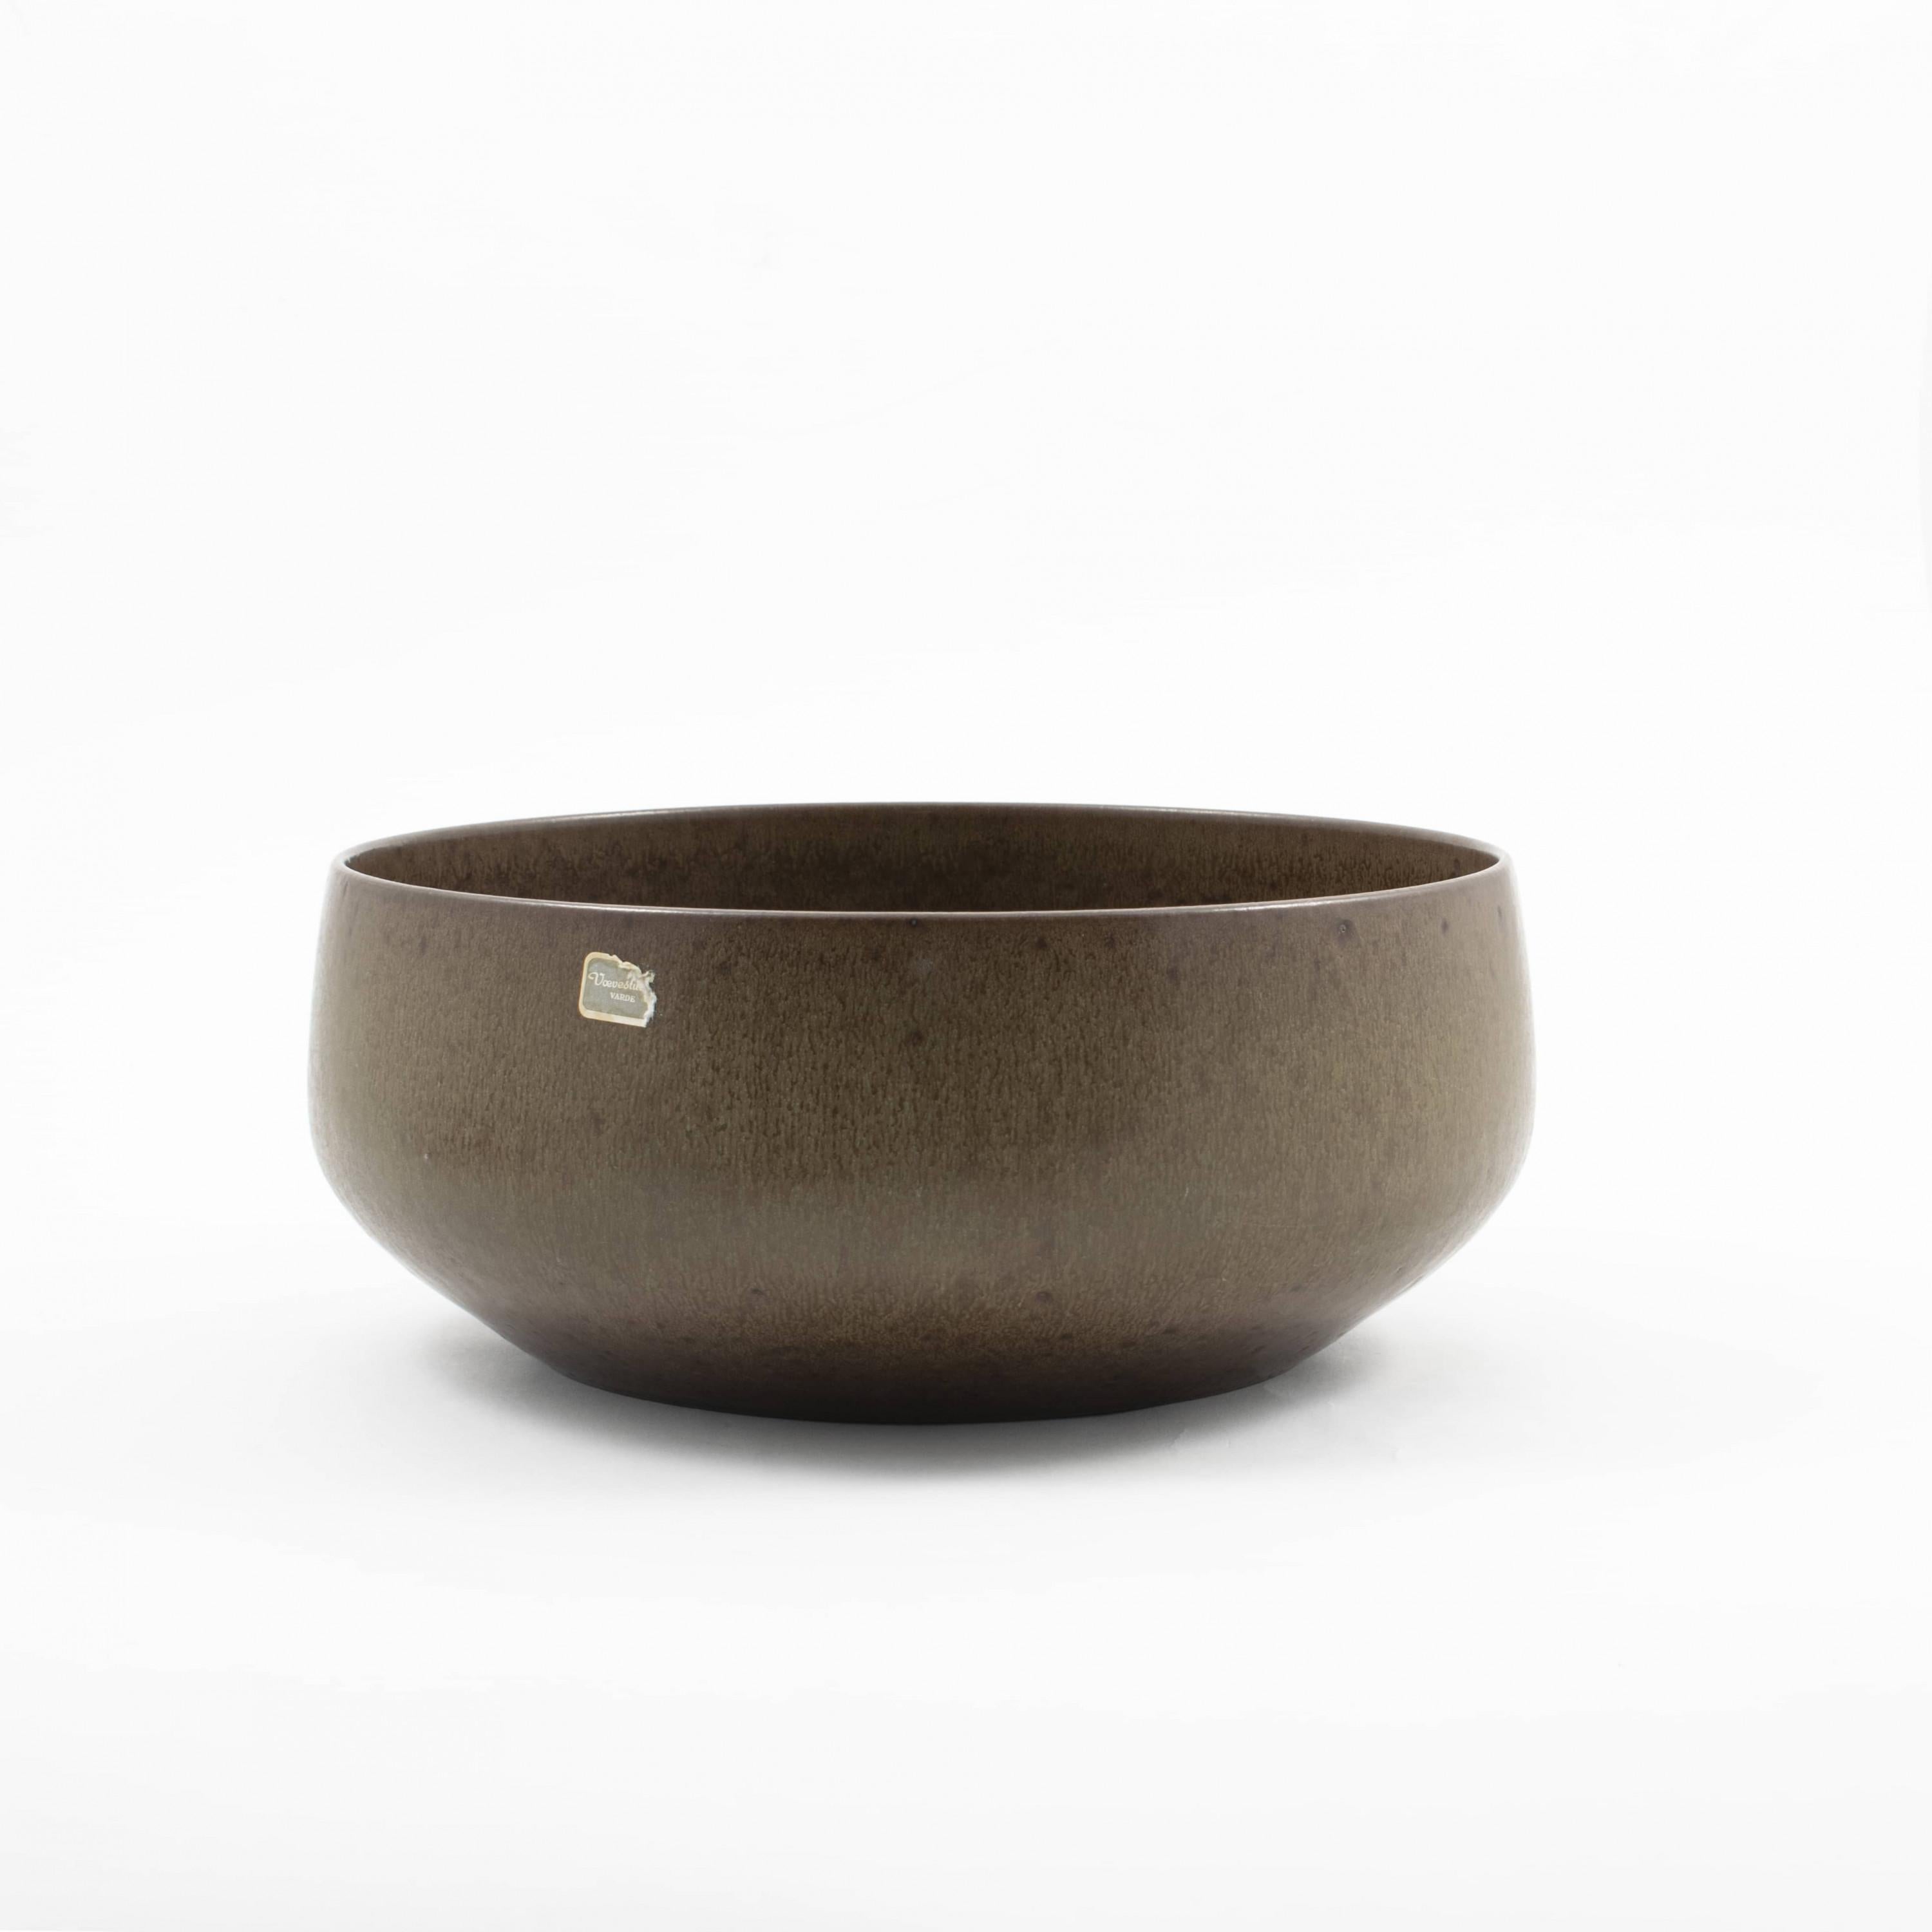 Per Linnemann-Schmidt (1912-1999)
Large stoneware bowl designed by Per Linnemann-Schmidt for Palshus
The bowl is decorated with brown haresfure glaze, inside the the bowl with an olive green glaze.
Manufactured in Denmark in 1971. Signed and